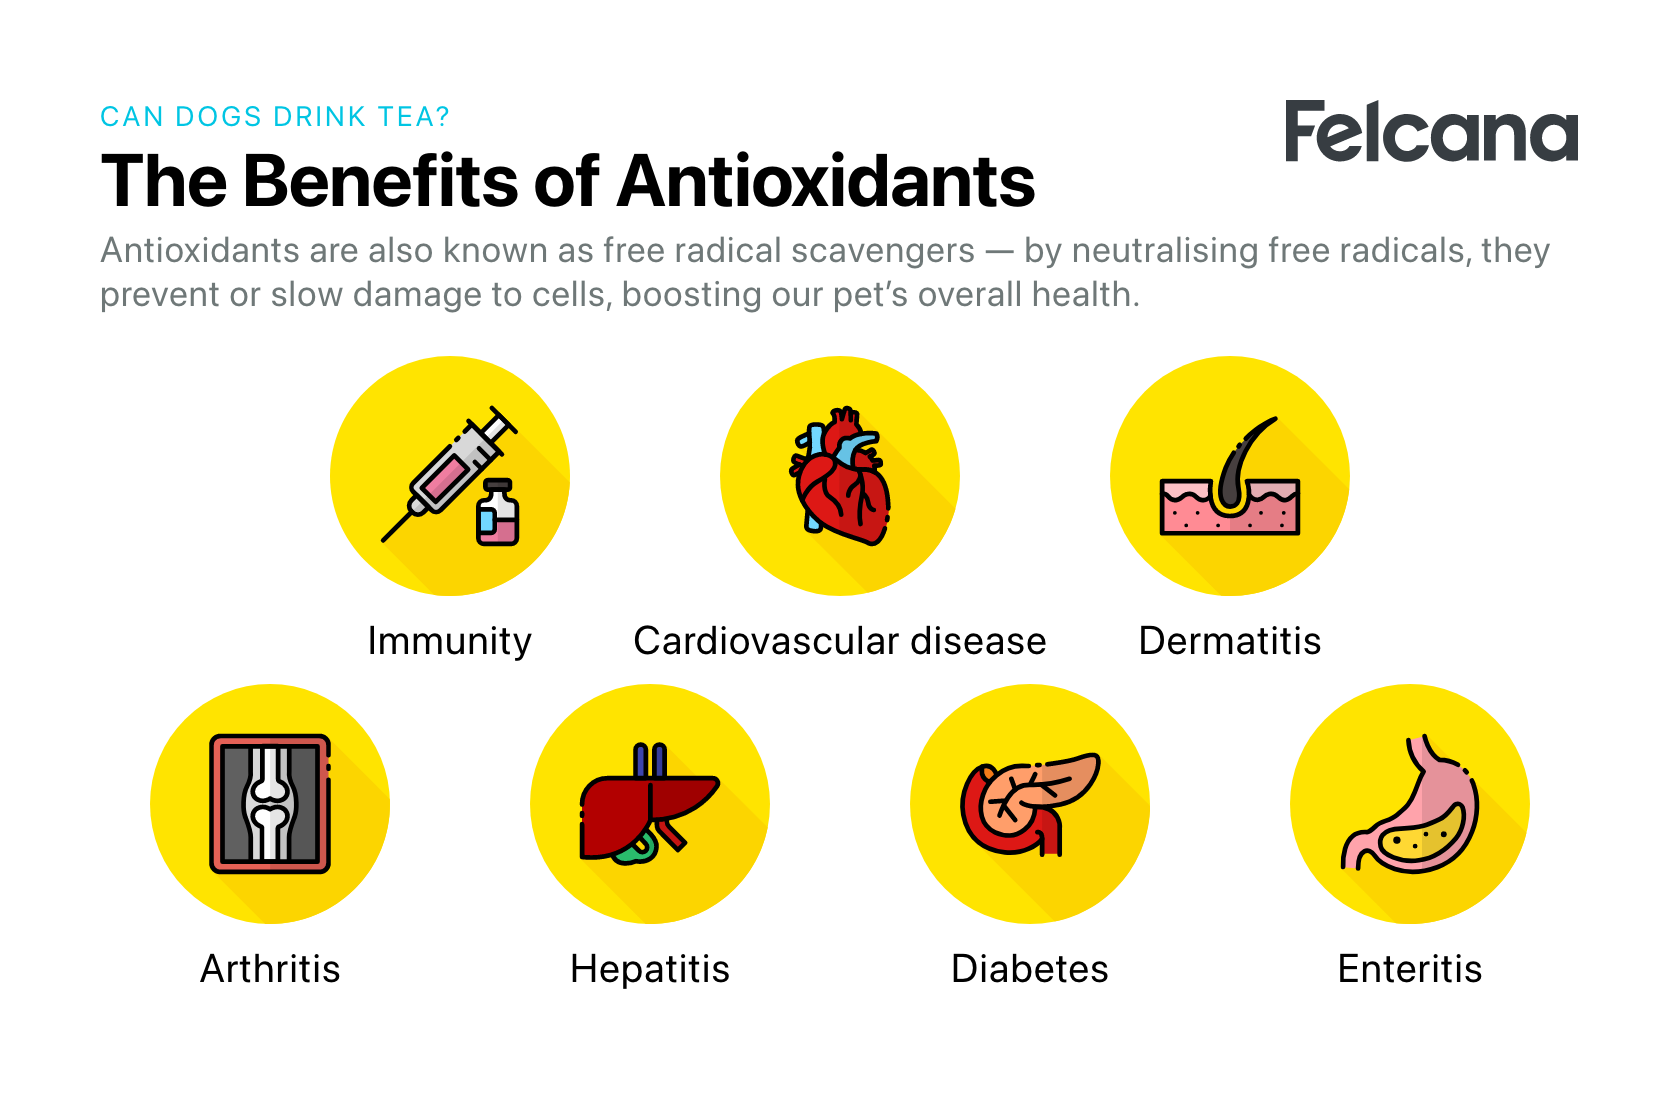 Benefits of antioxidants include neutralizing free radicals, preventing or slowing damage to cells